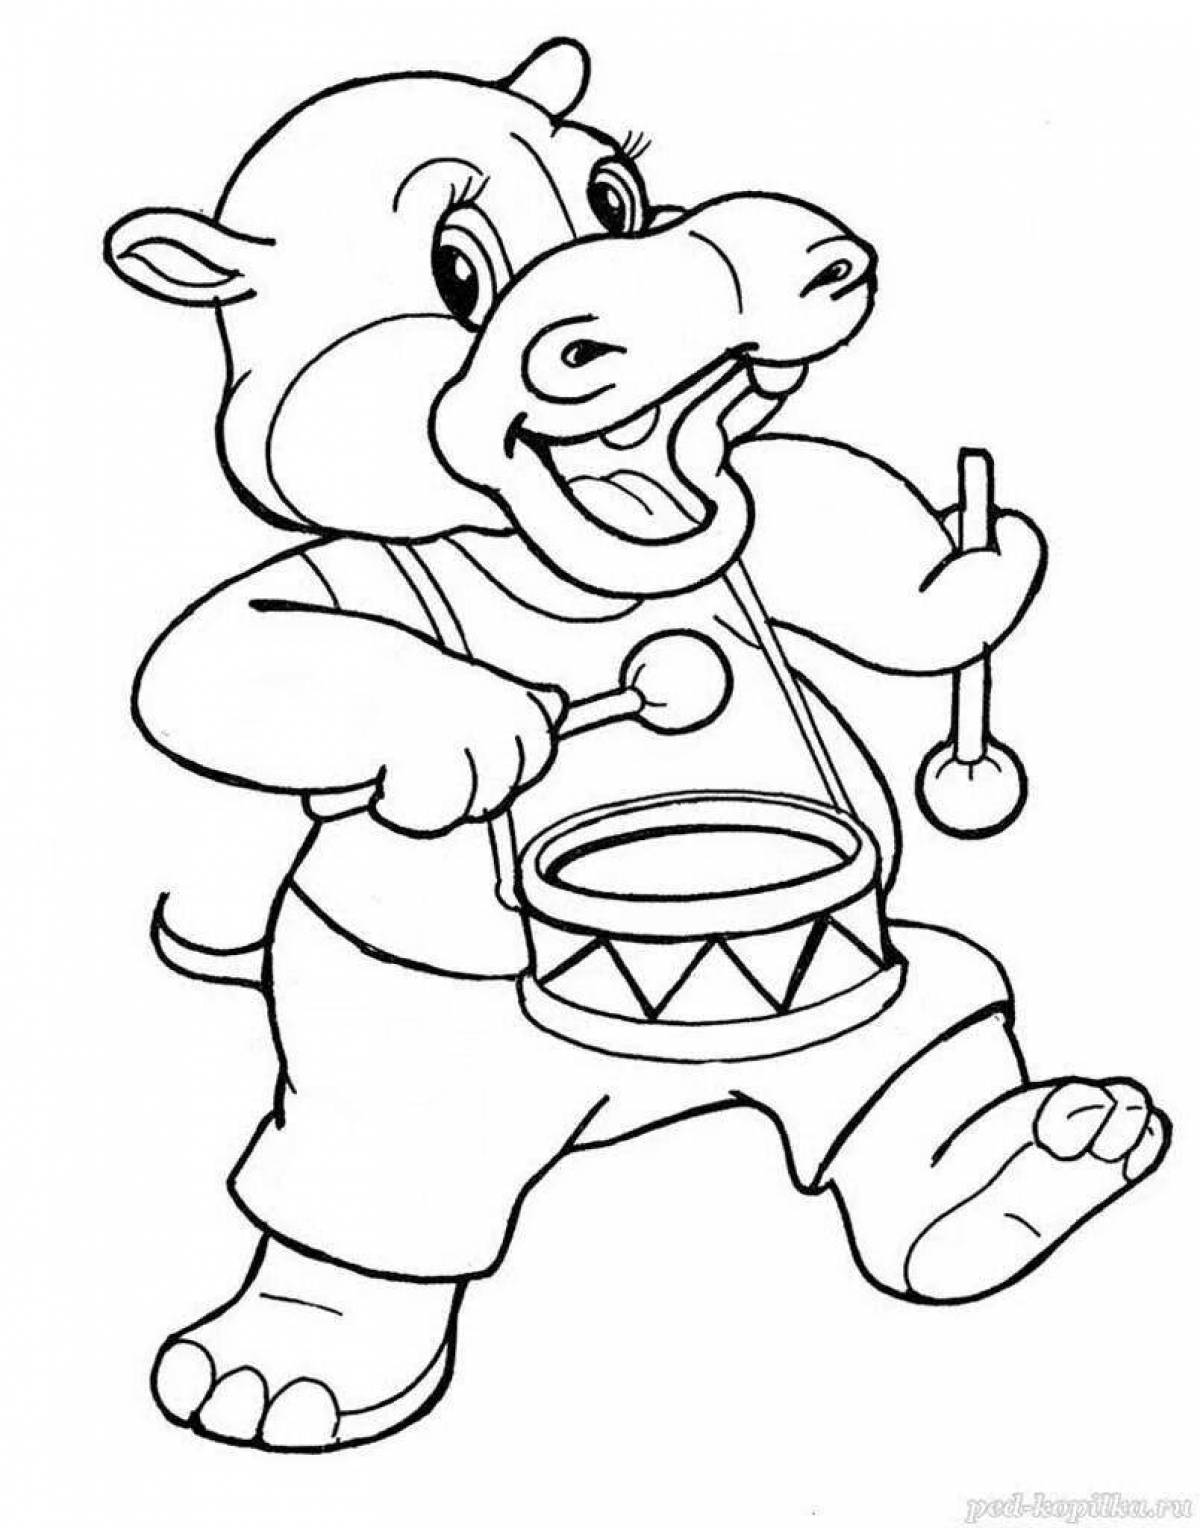 Cute hippo coloring for kids